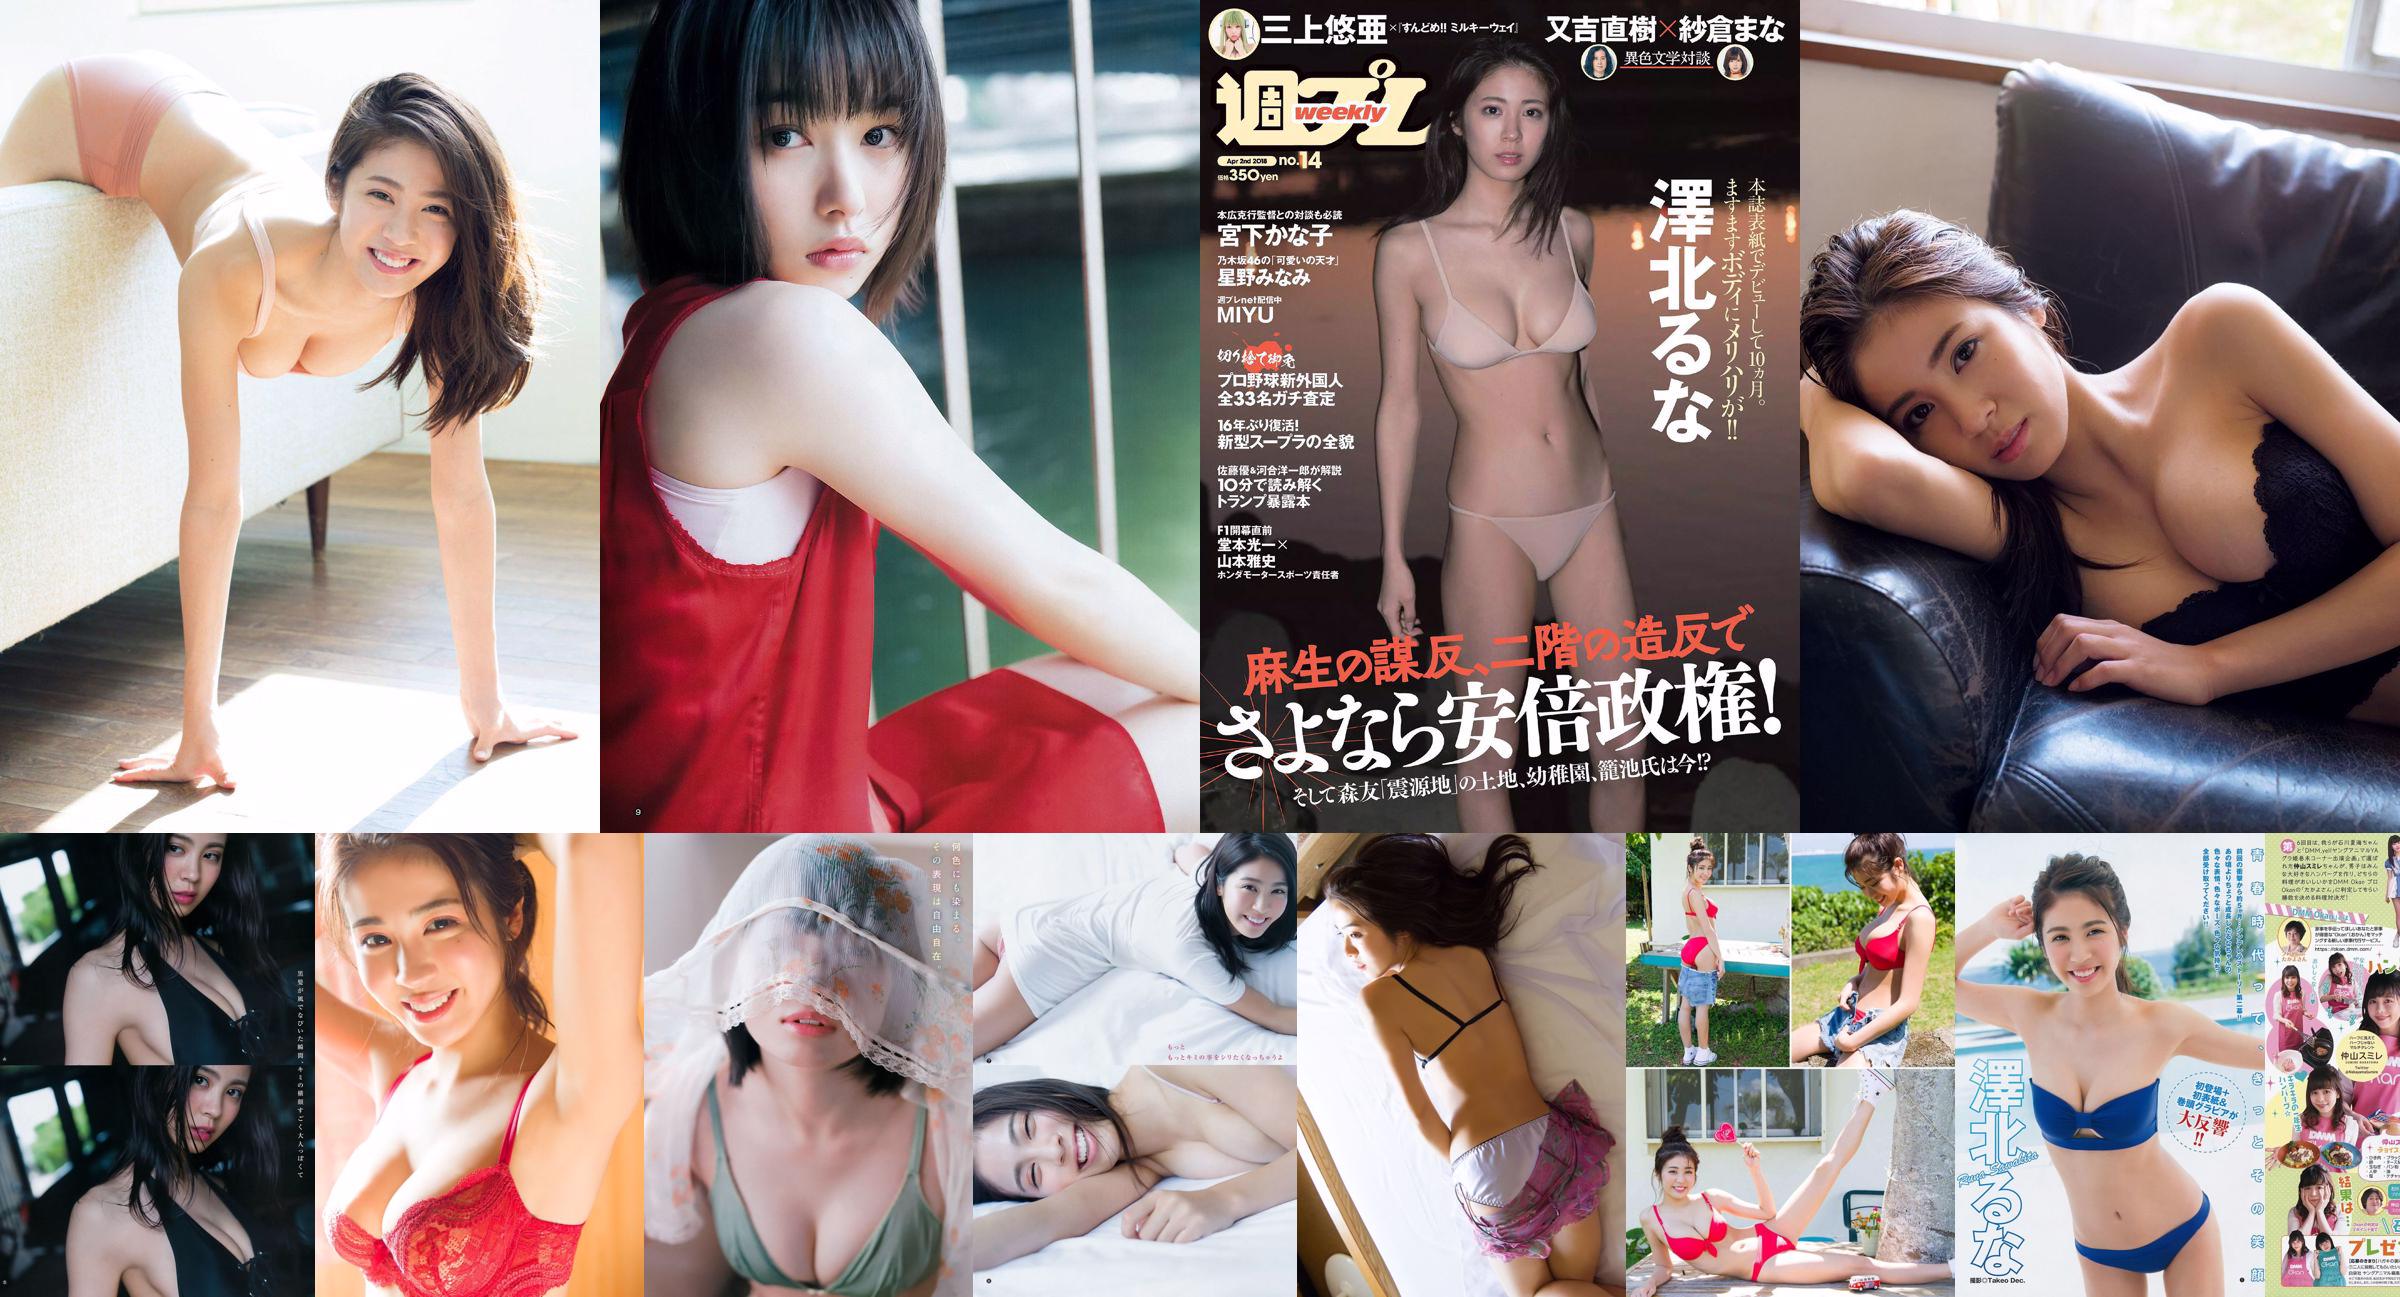 [FRIDAY] Luna Sawakita << "Beauty bust spills!" A little naughty sea camp (with video) >> Photo No.8221d7 Page 1